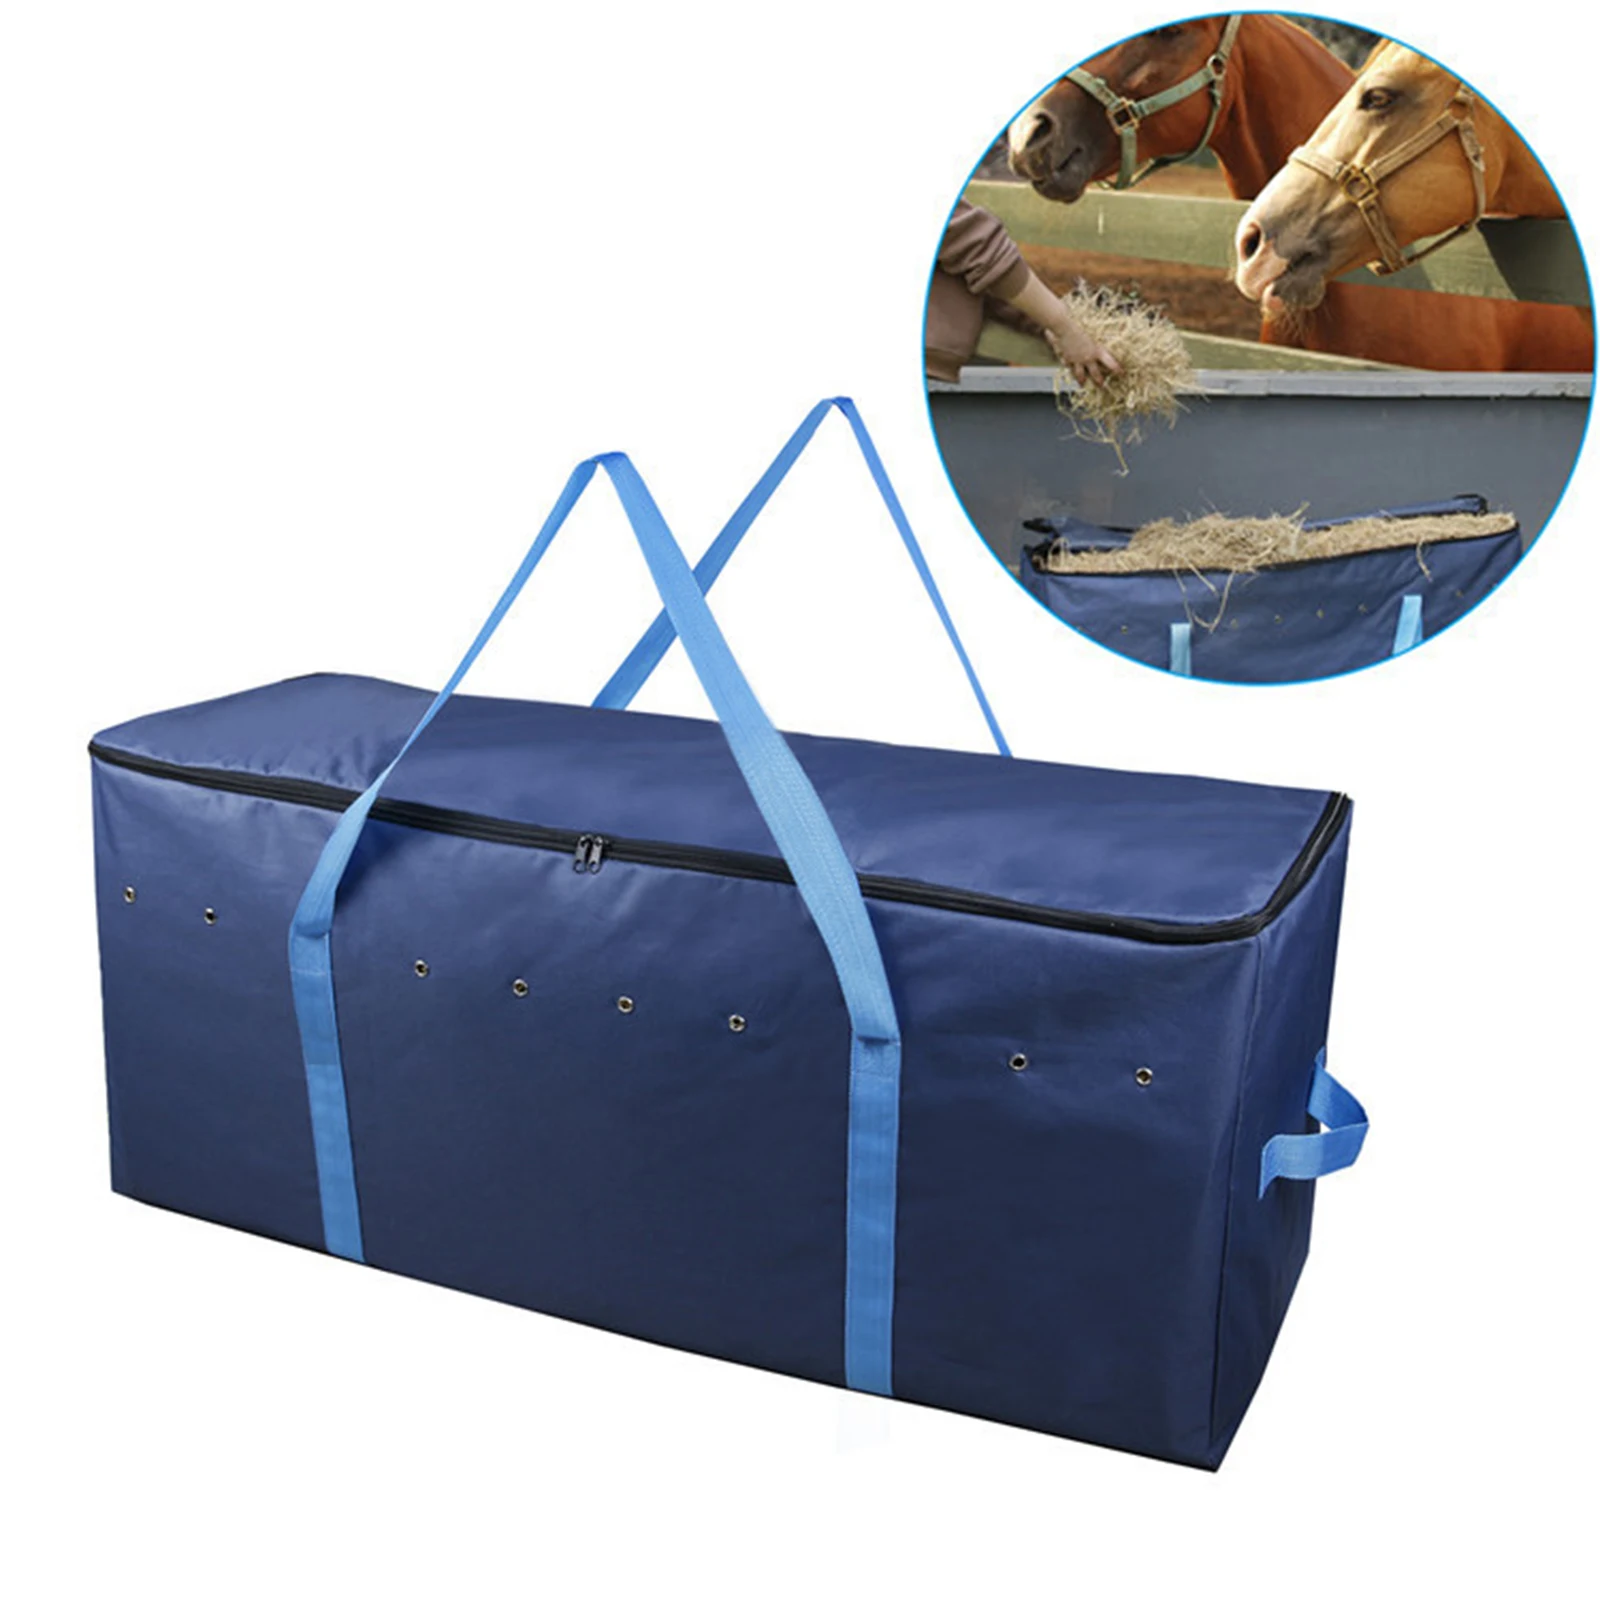 Folding Large Heavy Duty Hay Bale Carrying Bag Horse with Zipper Tote Oxford